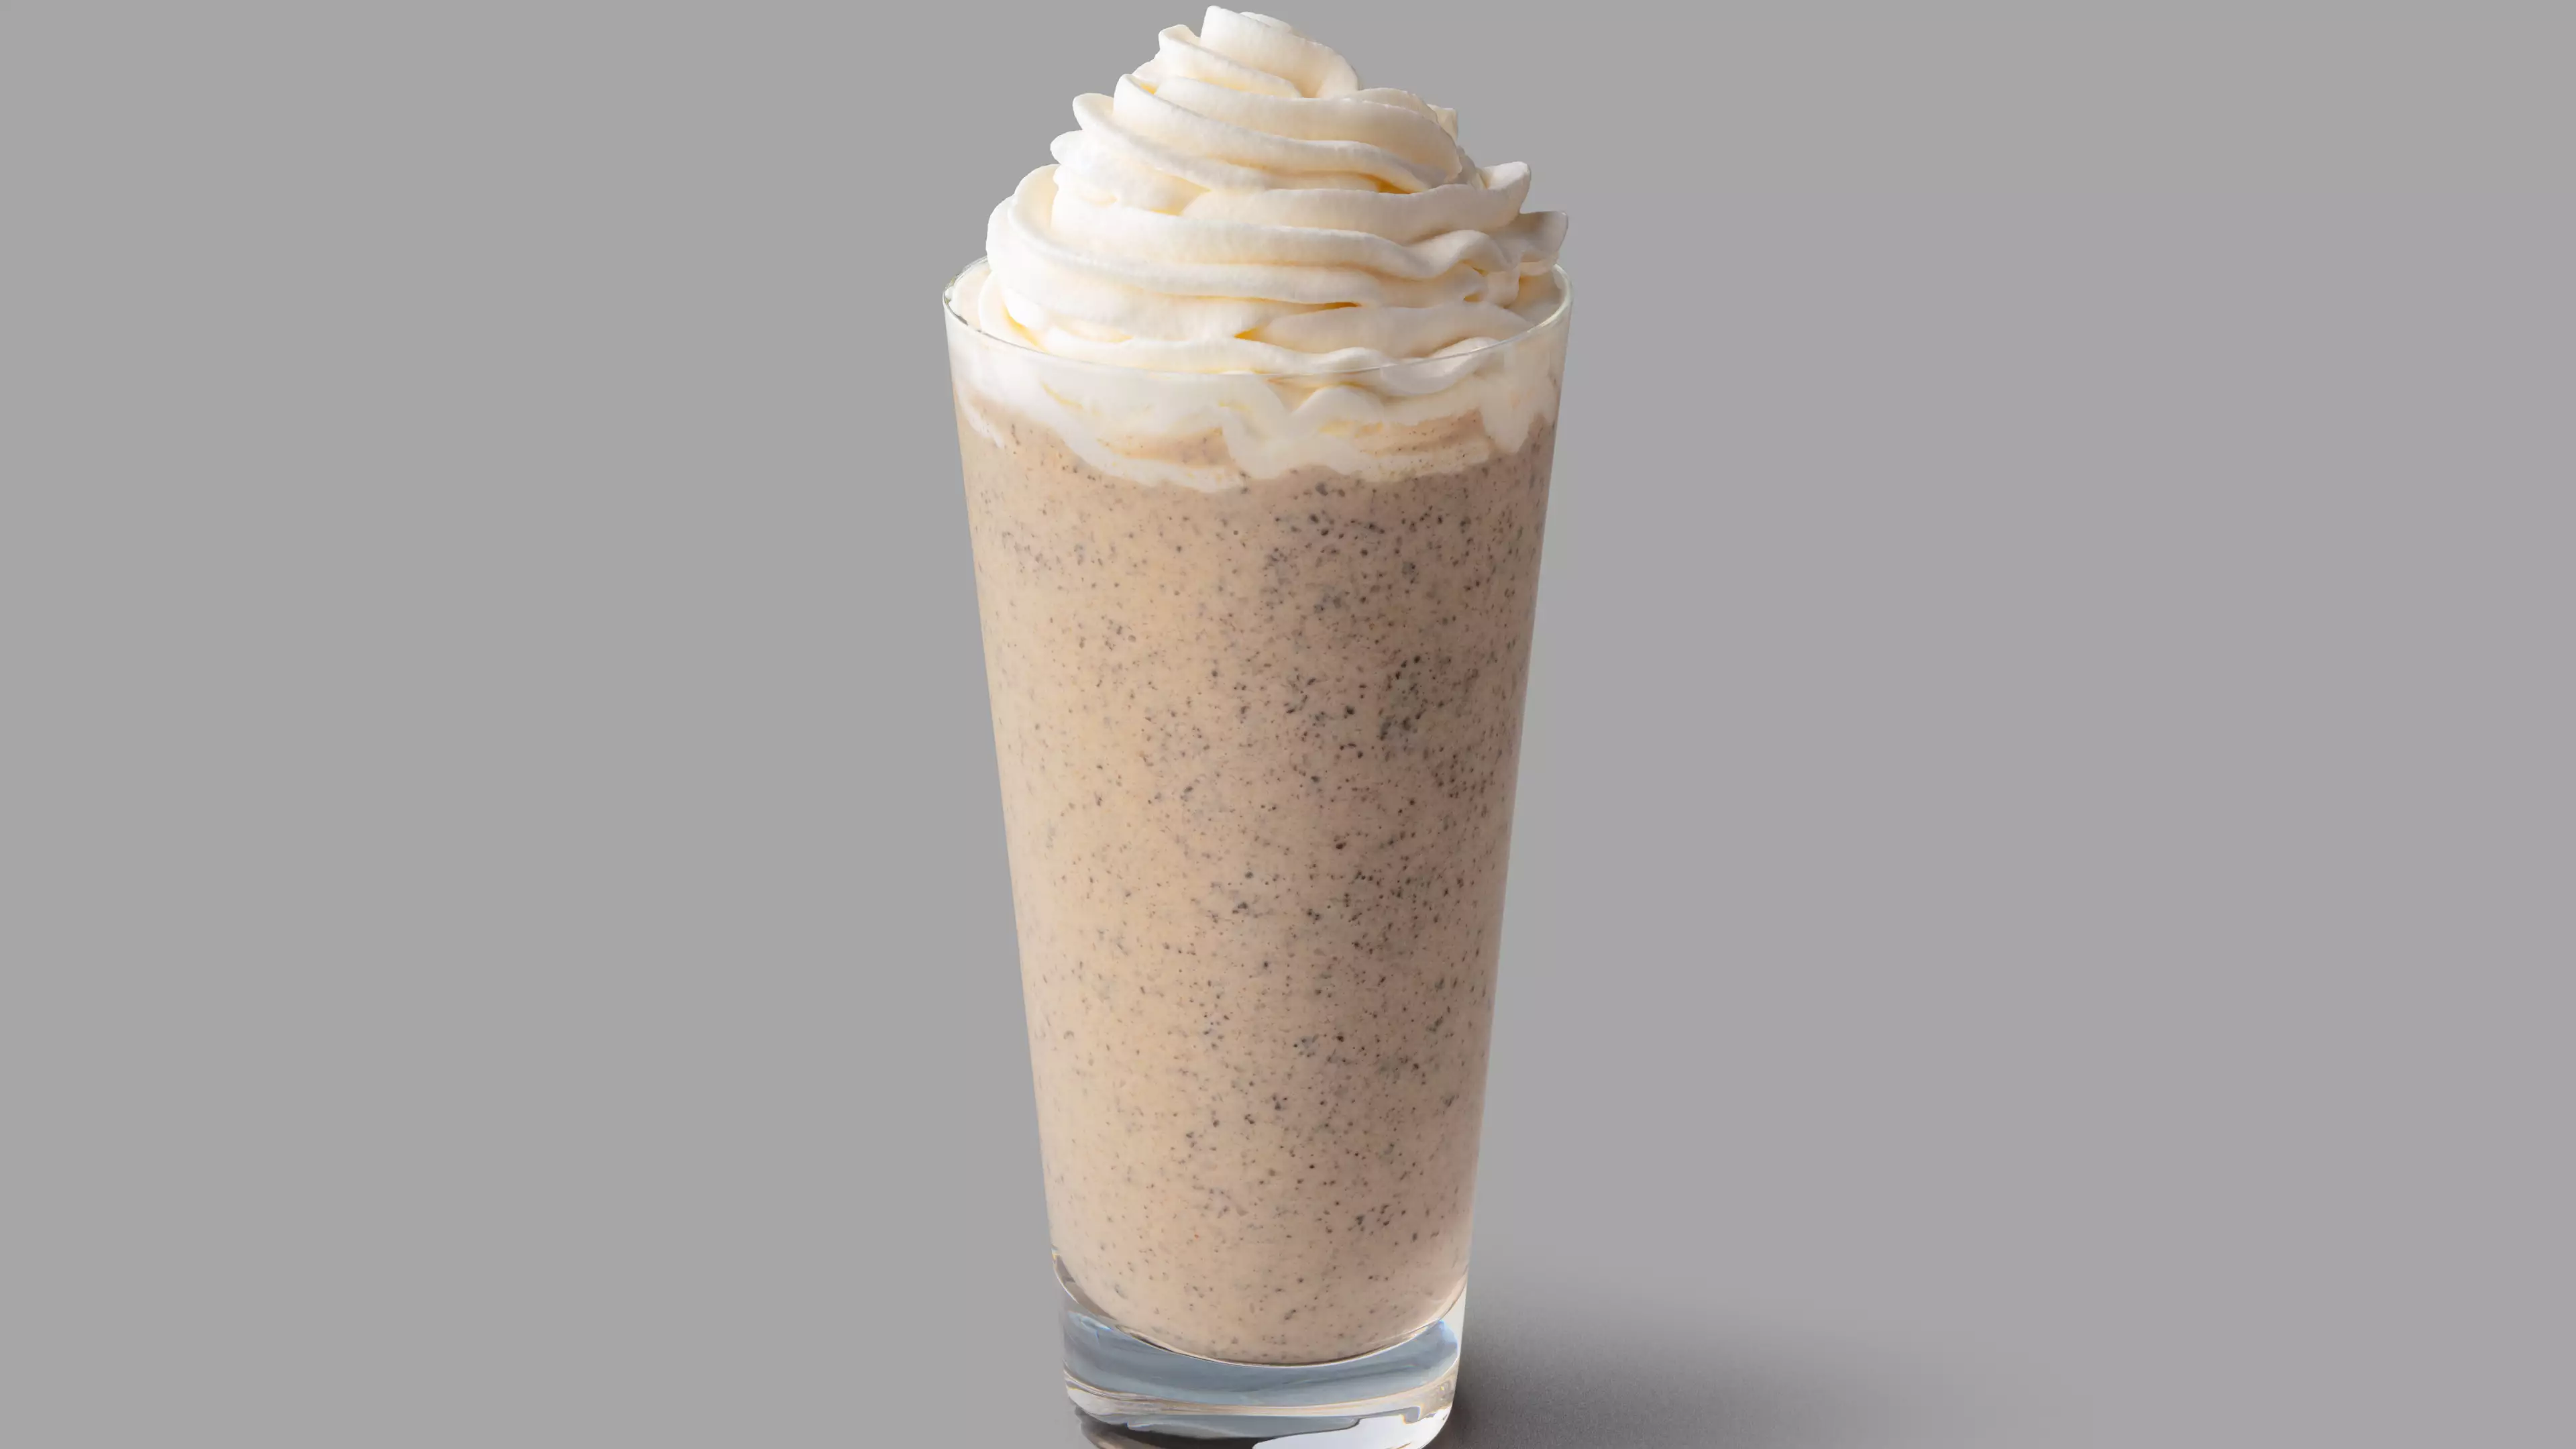 Starbucks Has Launched Peanut Butter Cup And S'mores Frappuccinos